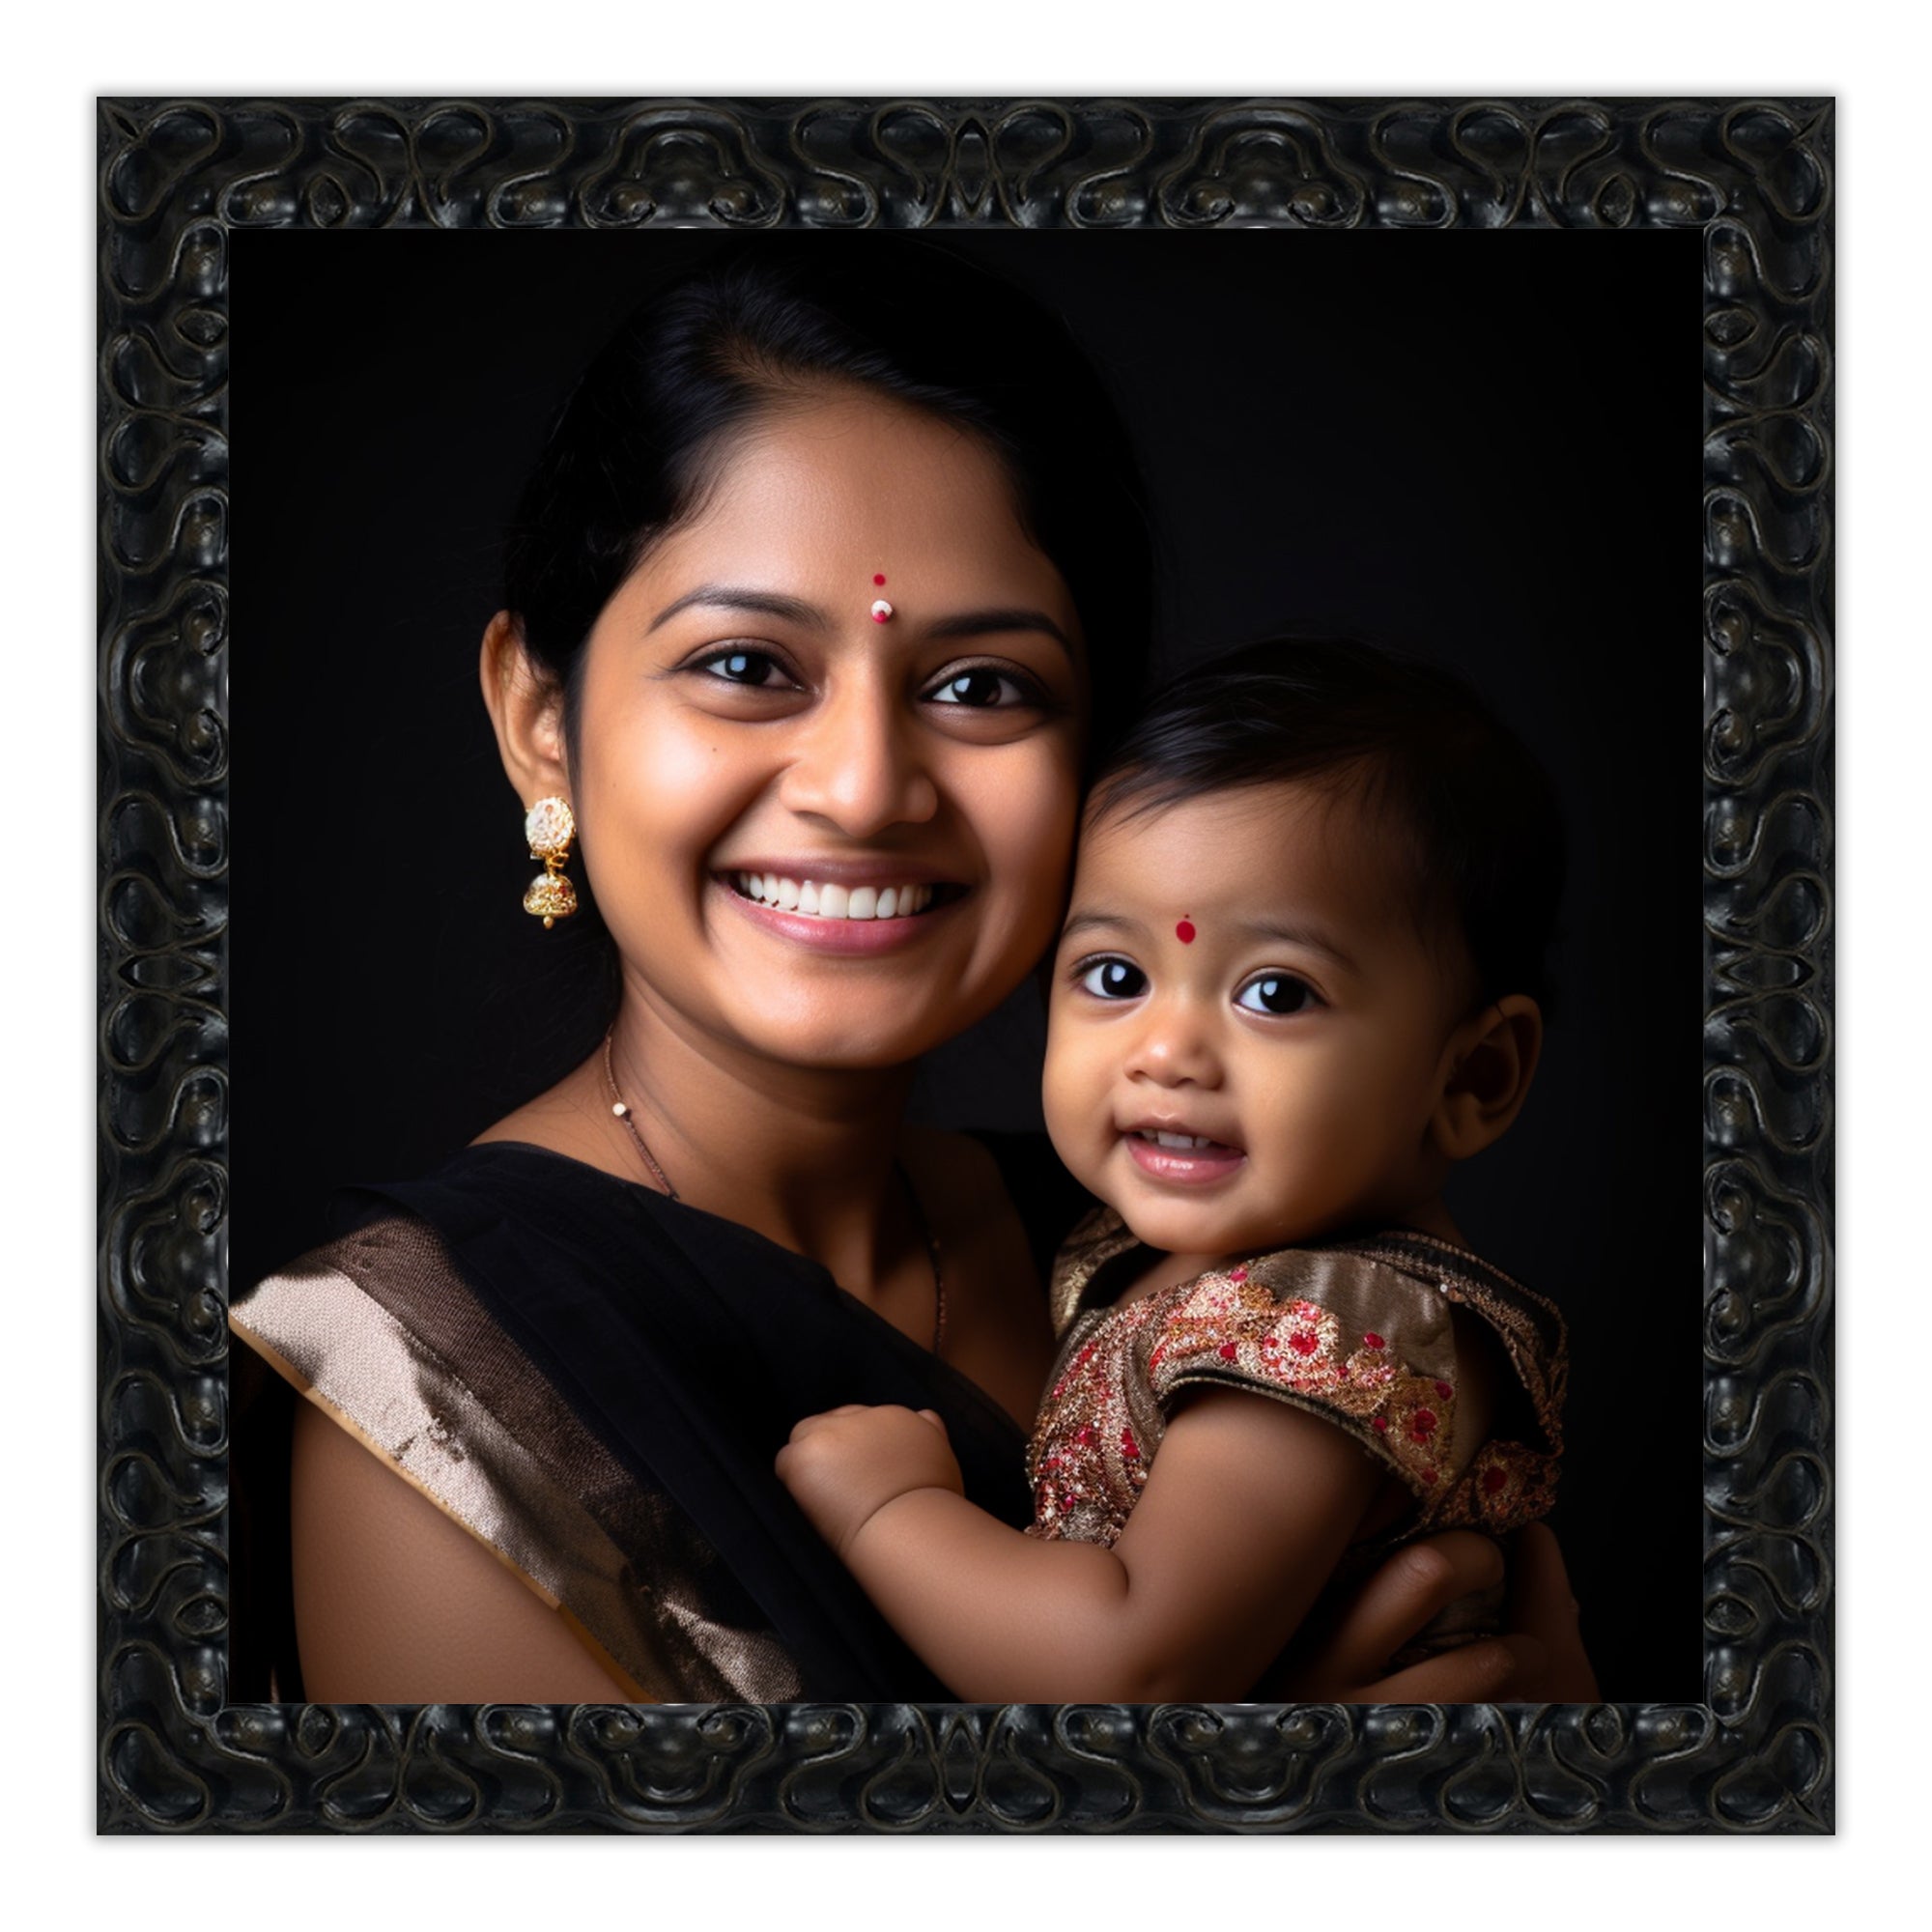 Large Frame - 17" x 17" Picture Size